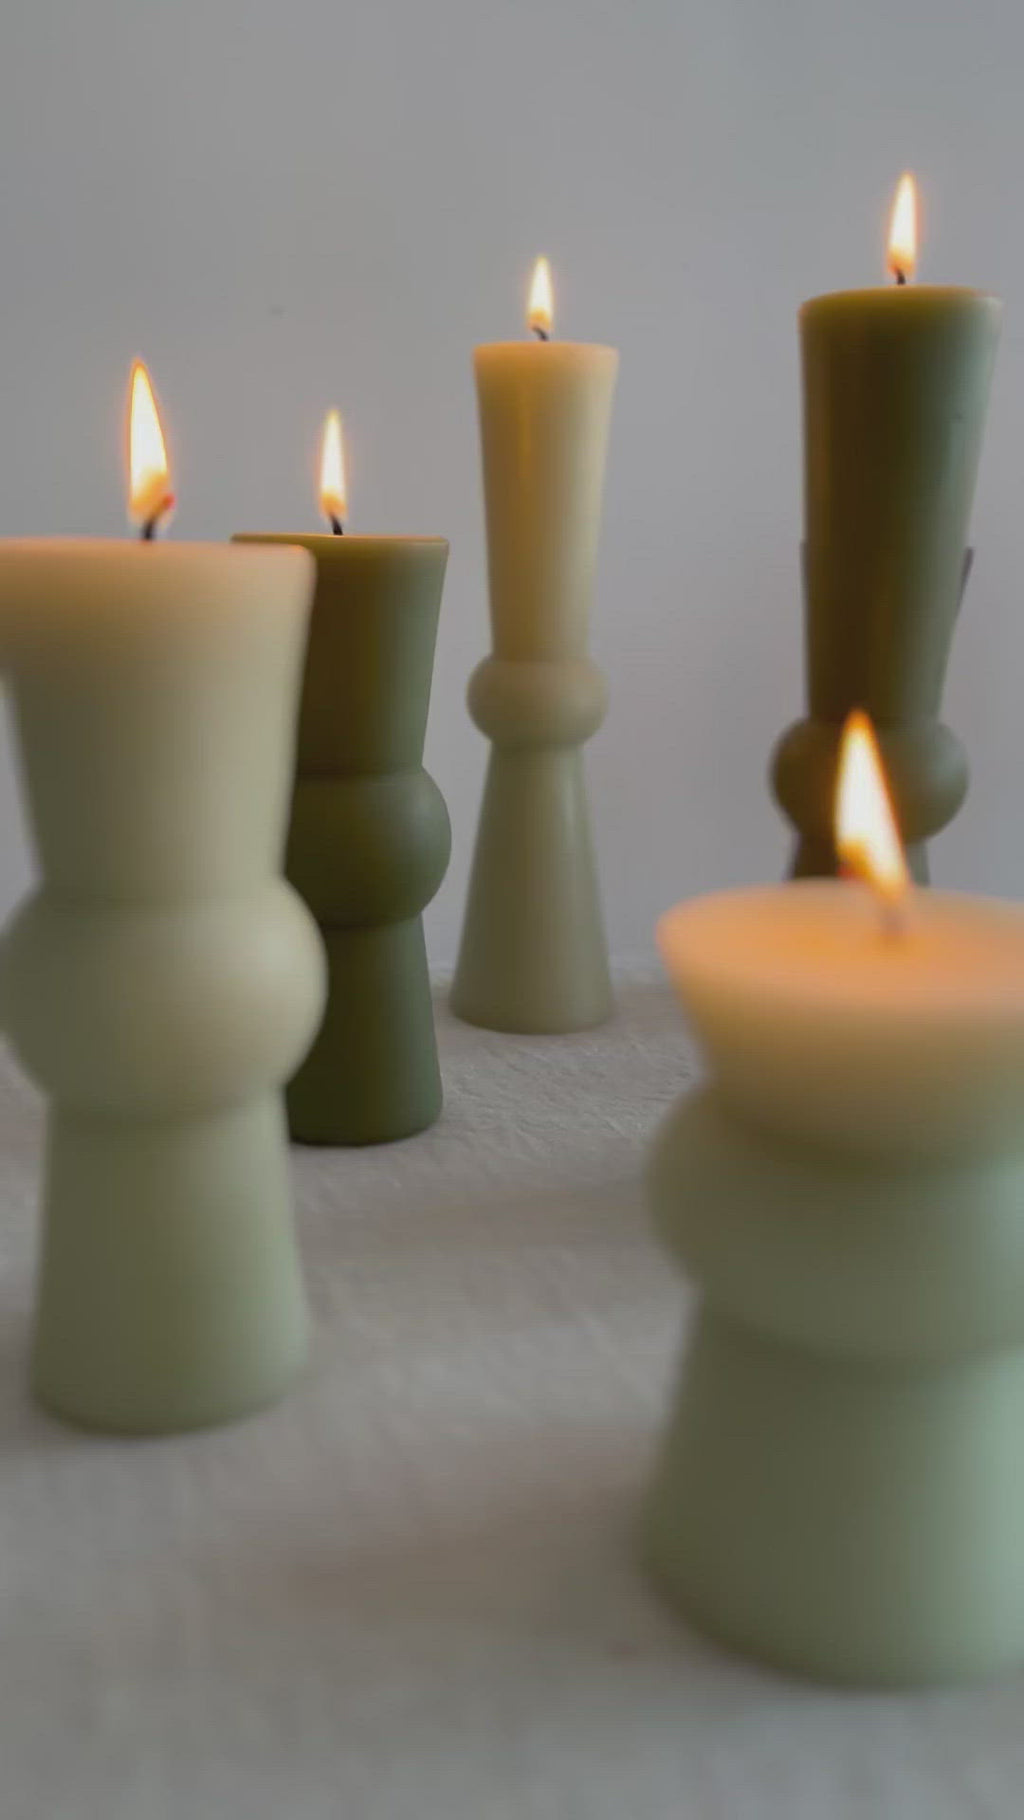 video of assorted totem colors in earth tones on table with flame lit.